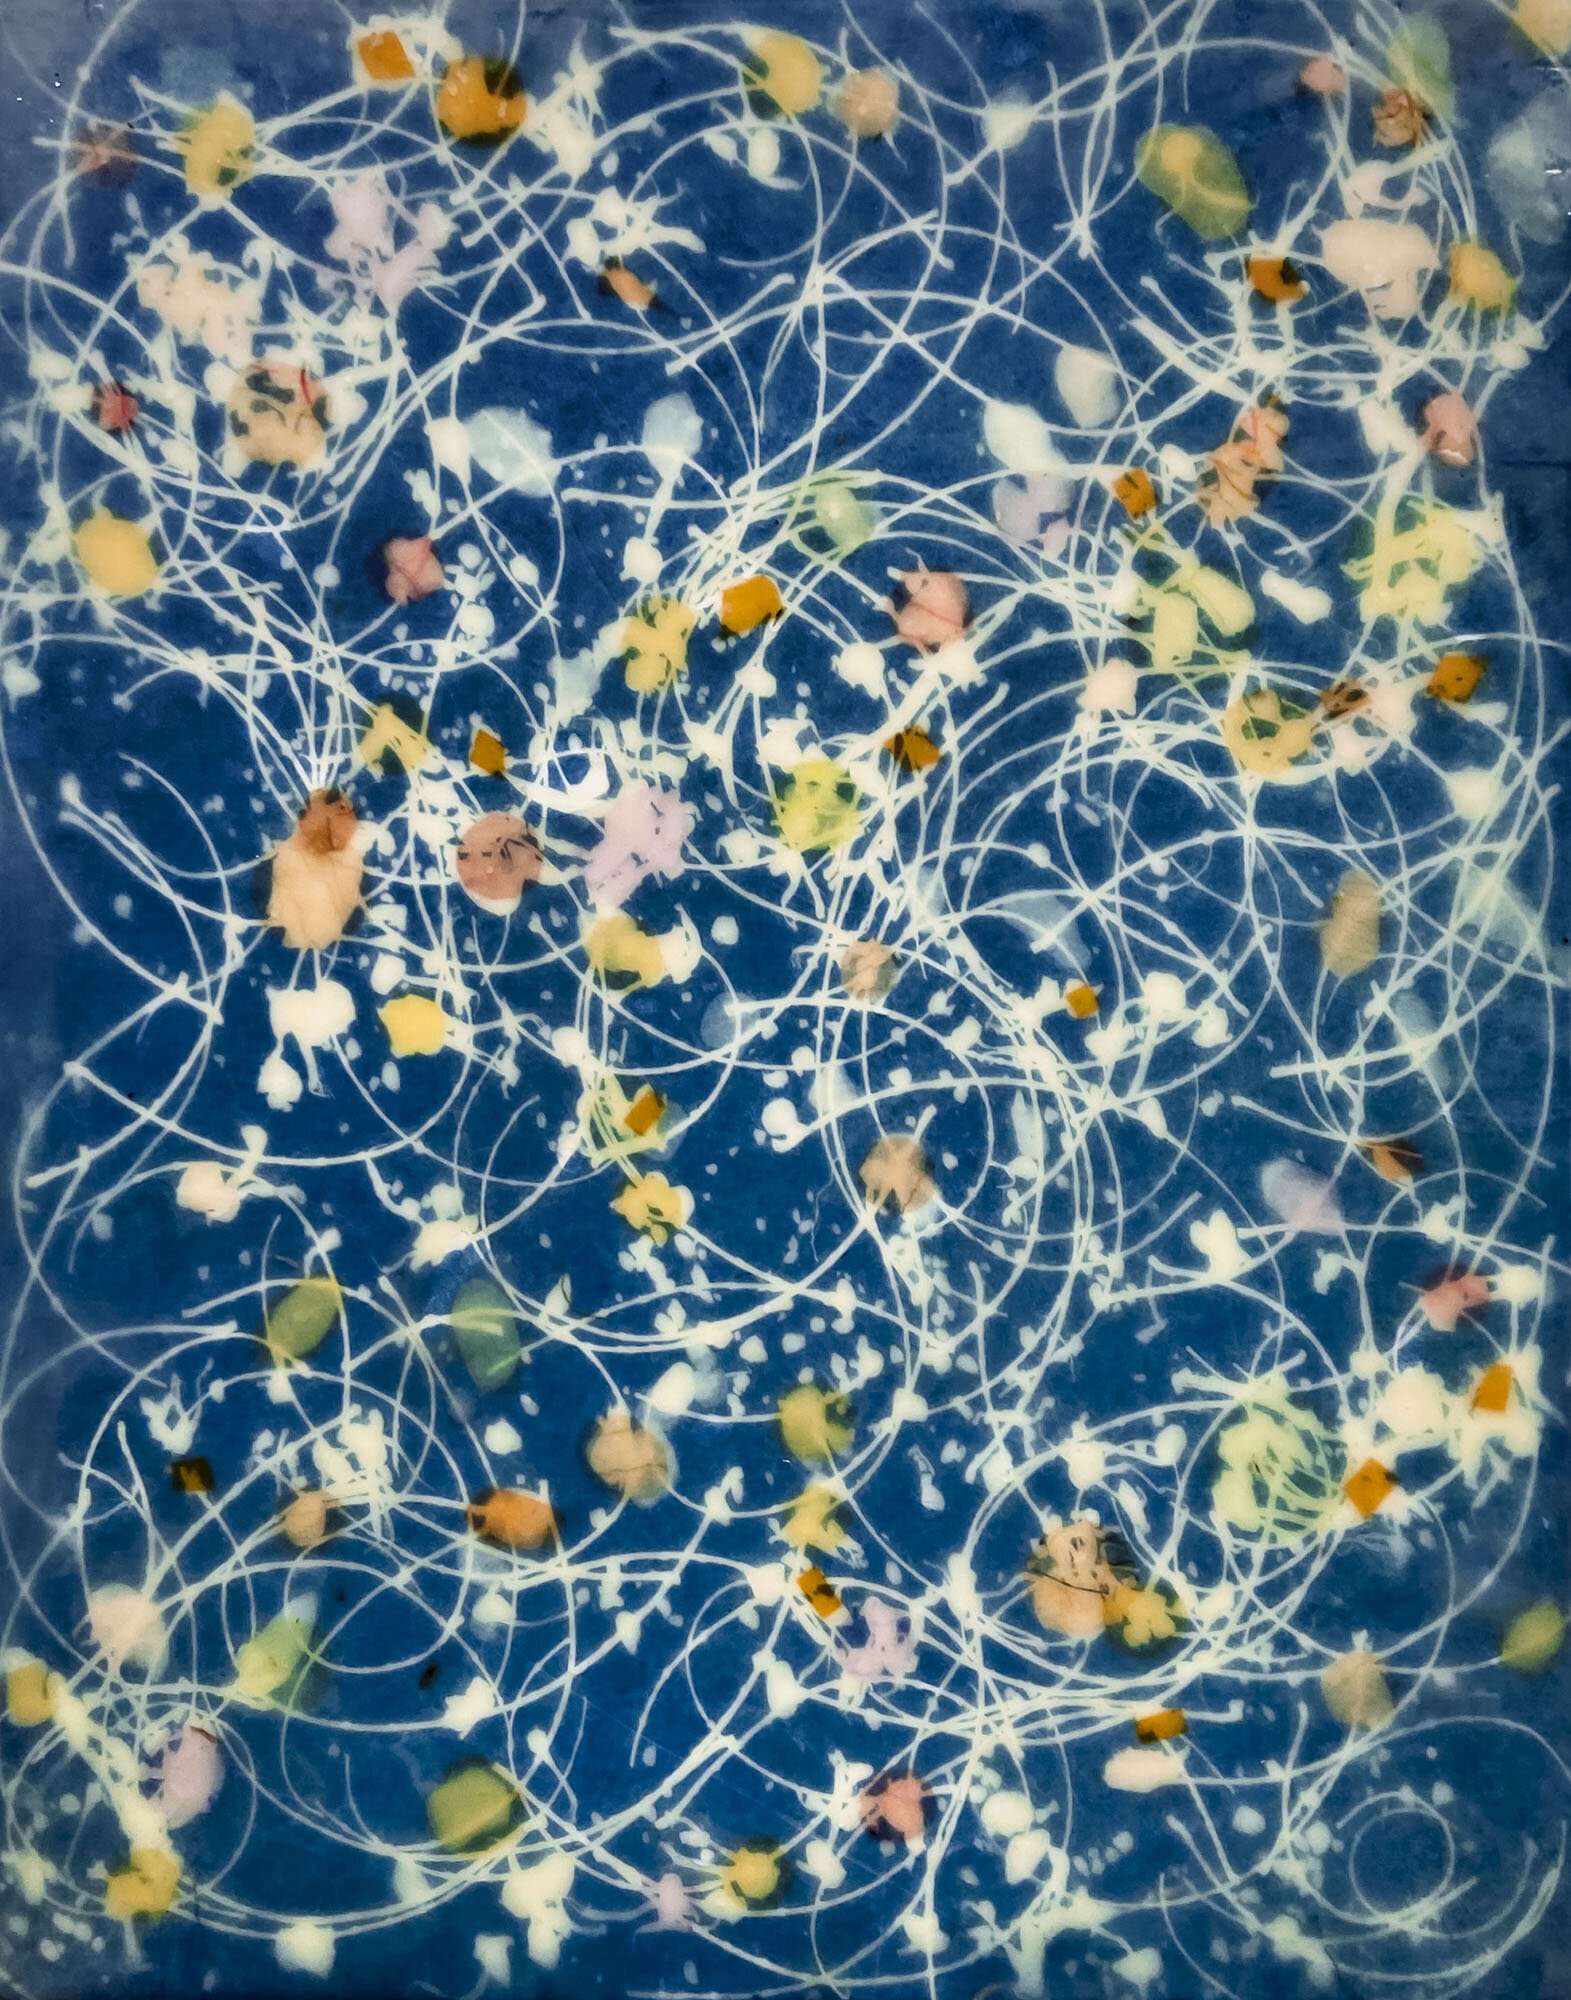   Tobago Tides I,  2020  Cyanotype on Japanese rice paper, colored Japanese rice papers, wax, encaustic board   11” x 14” 